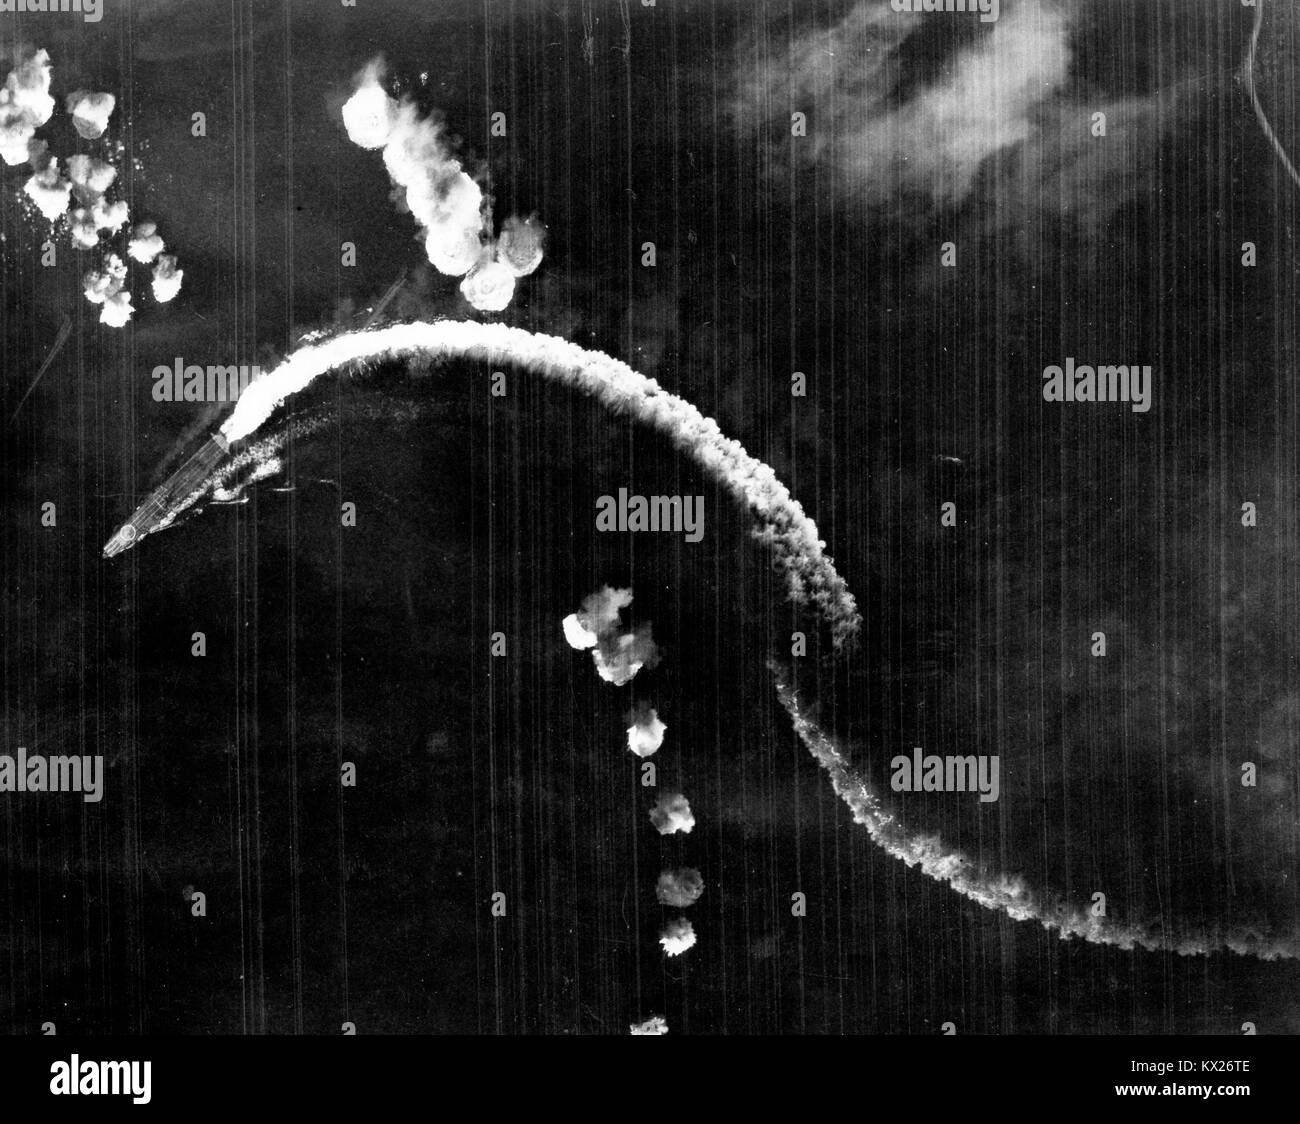 Japanese aircraft carrier Hiryu maneuvering during a high-level bombing attack by USAAF B-17 bombers, shortly after 8AM, 4 June 1942 during Battle of Midway Stock Photo